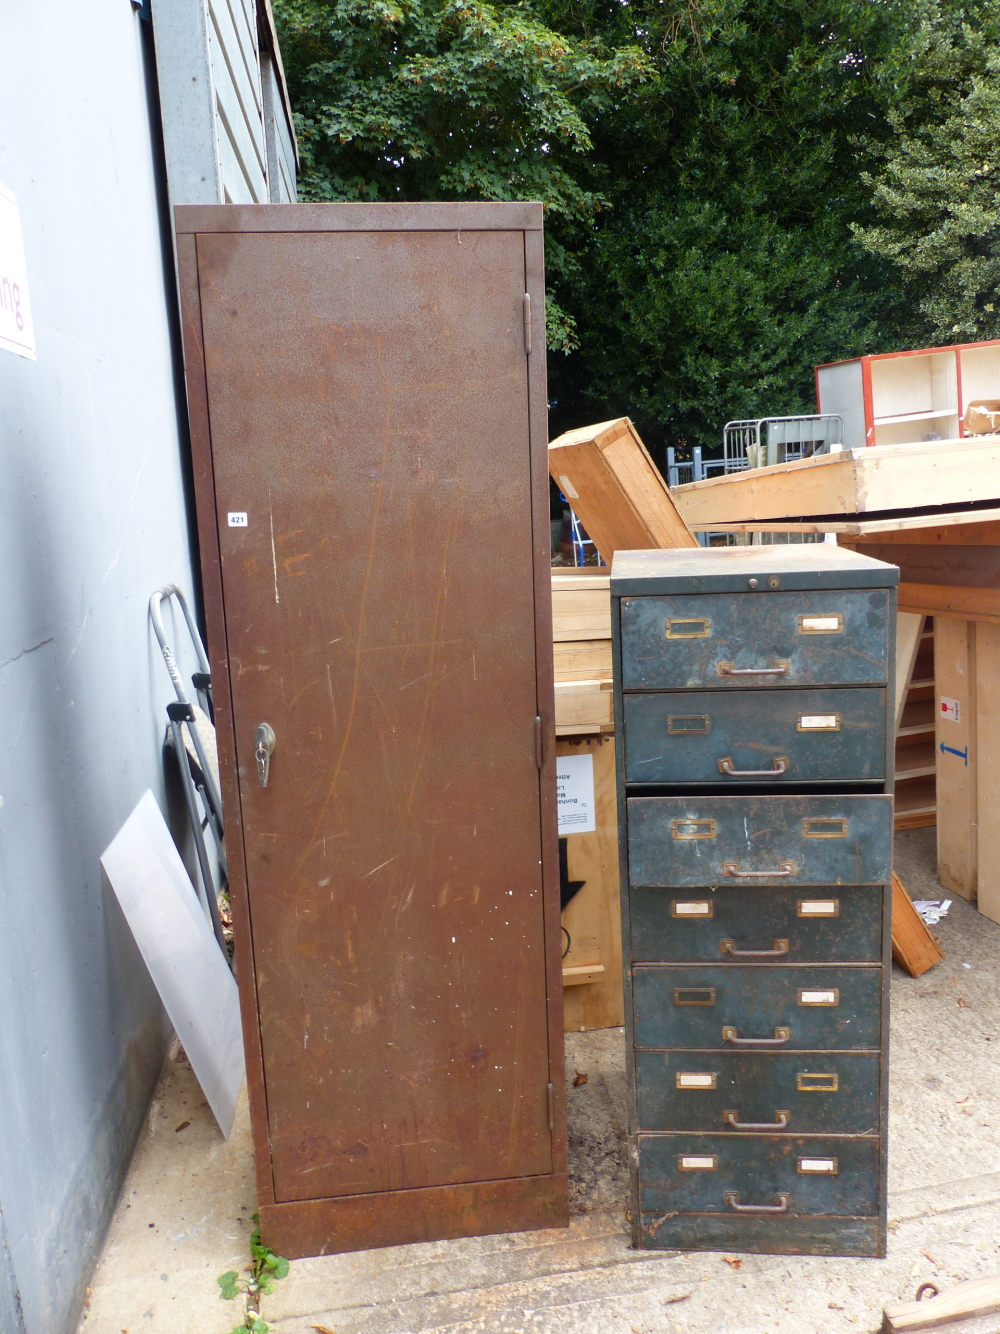 A STEEL CABINET AND A FILE CABINET (2)